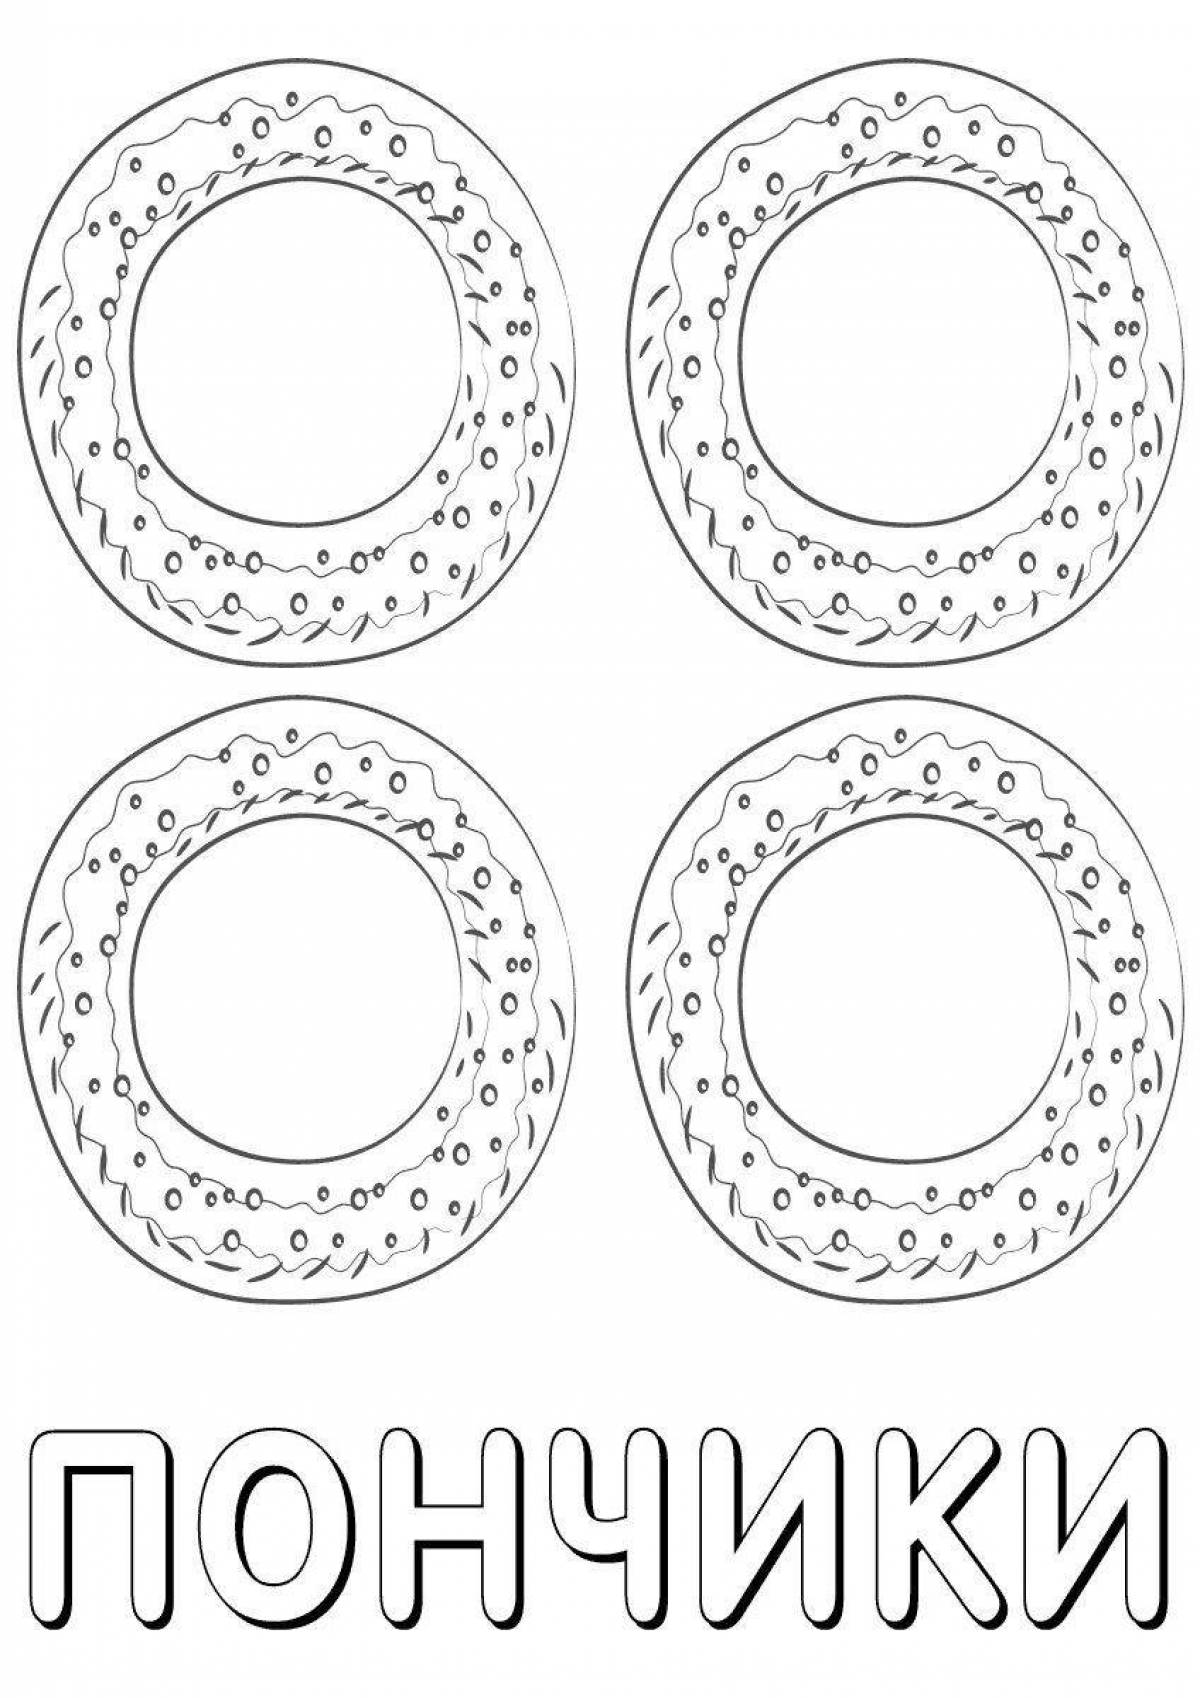 Nutritious bagel coloring page